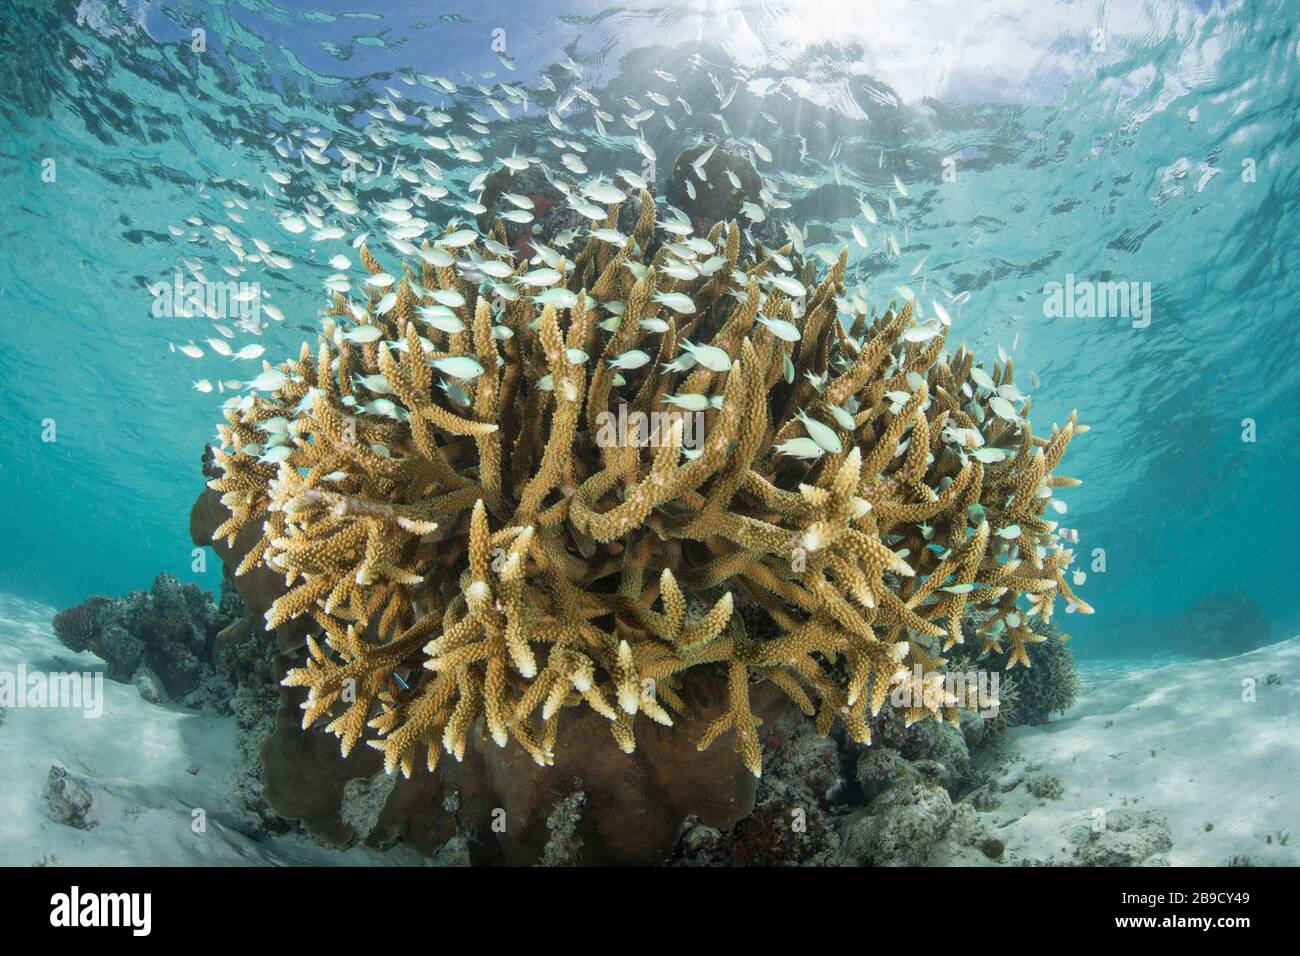 Damselfish school around a fragile coral colony growing on a reef. Stock Photo